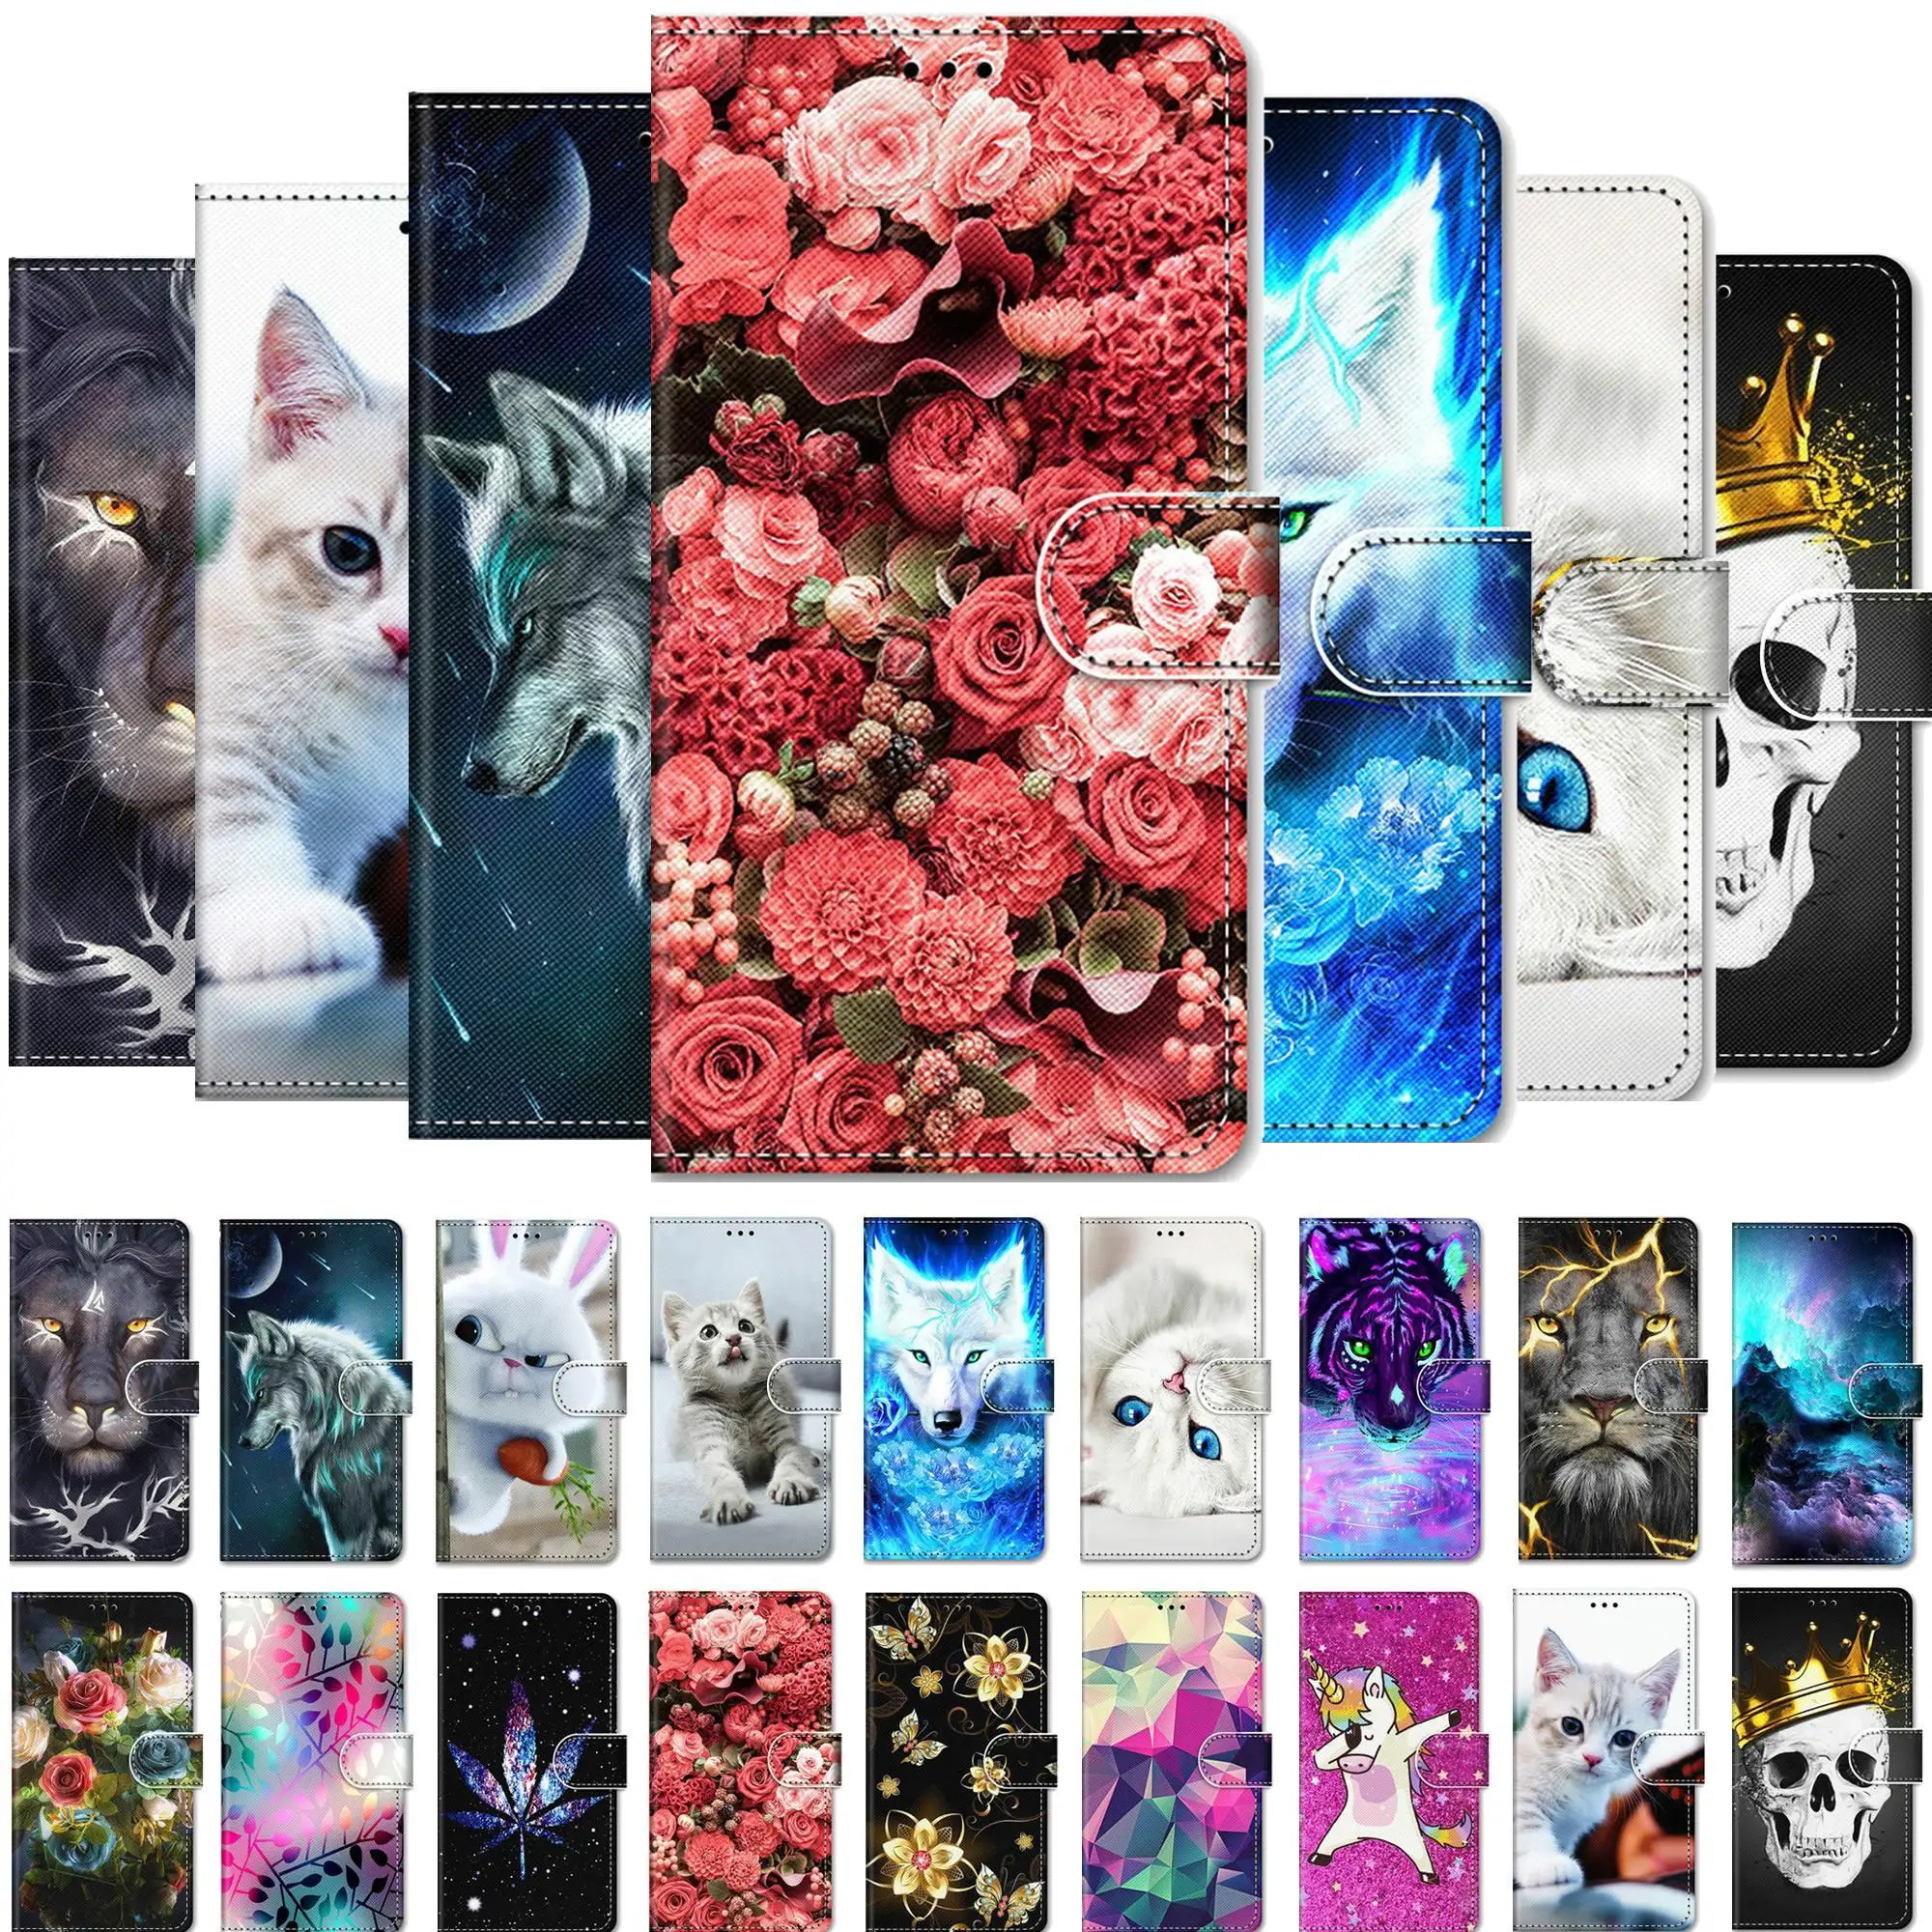 

Luxury Animal Painted Leather Case For Samsung Galaxy A10 A105F Cover A50 A70 A40 A60 A80 A90 A605F A705F Protect Wallet Coque